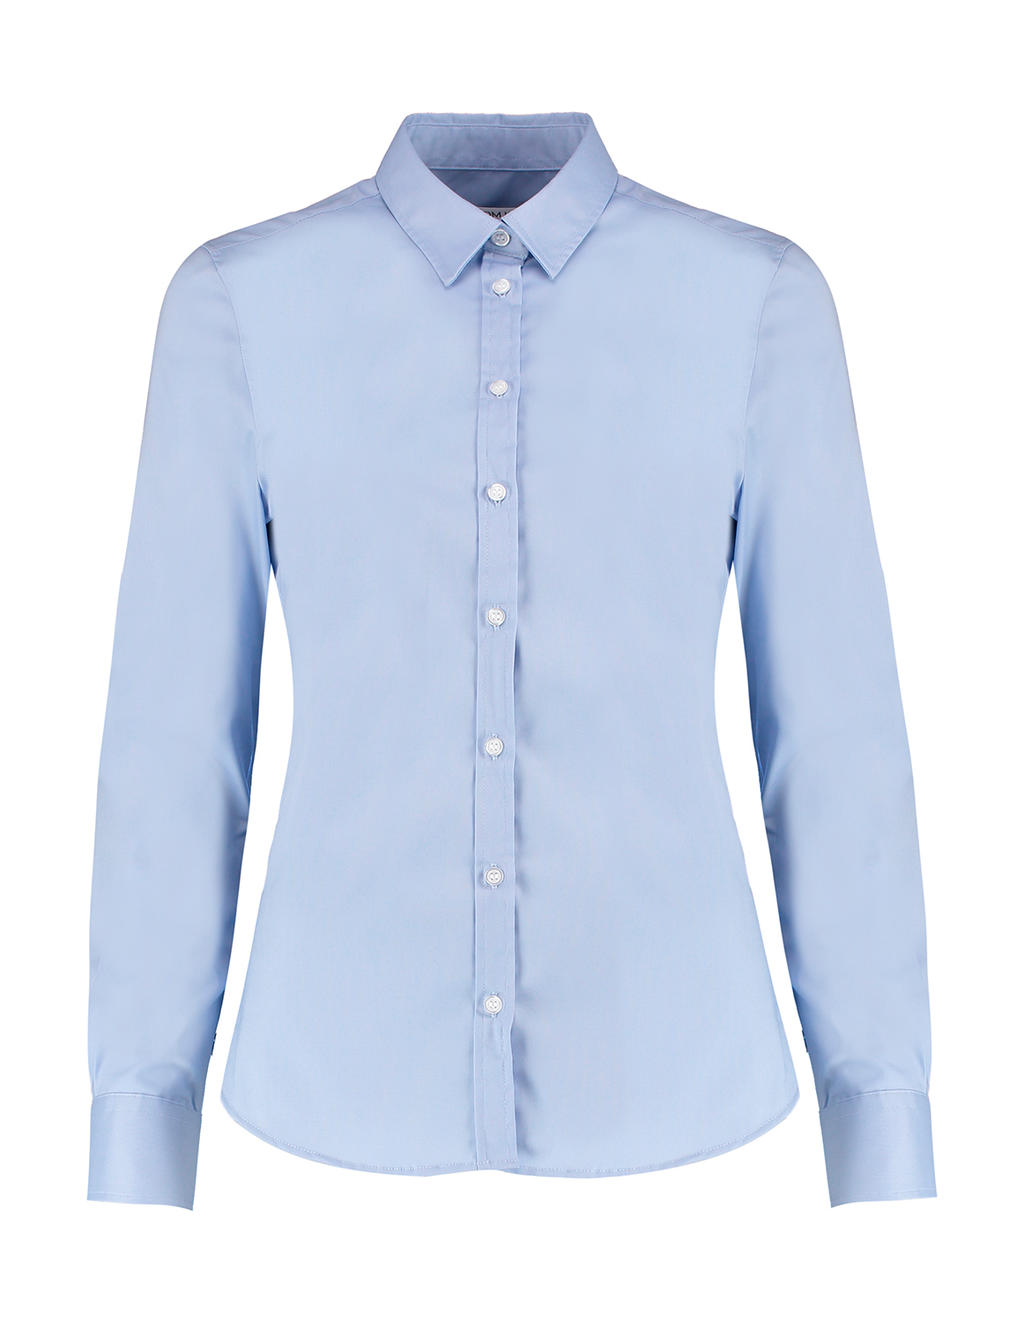  Womens Tailored Fit Stretch Oxford Shirt LS in Farbe Light Blue